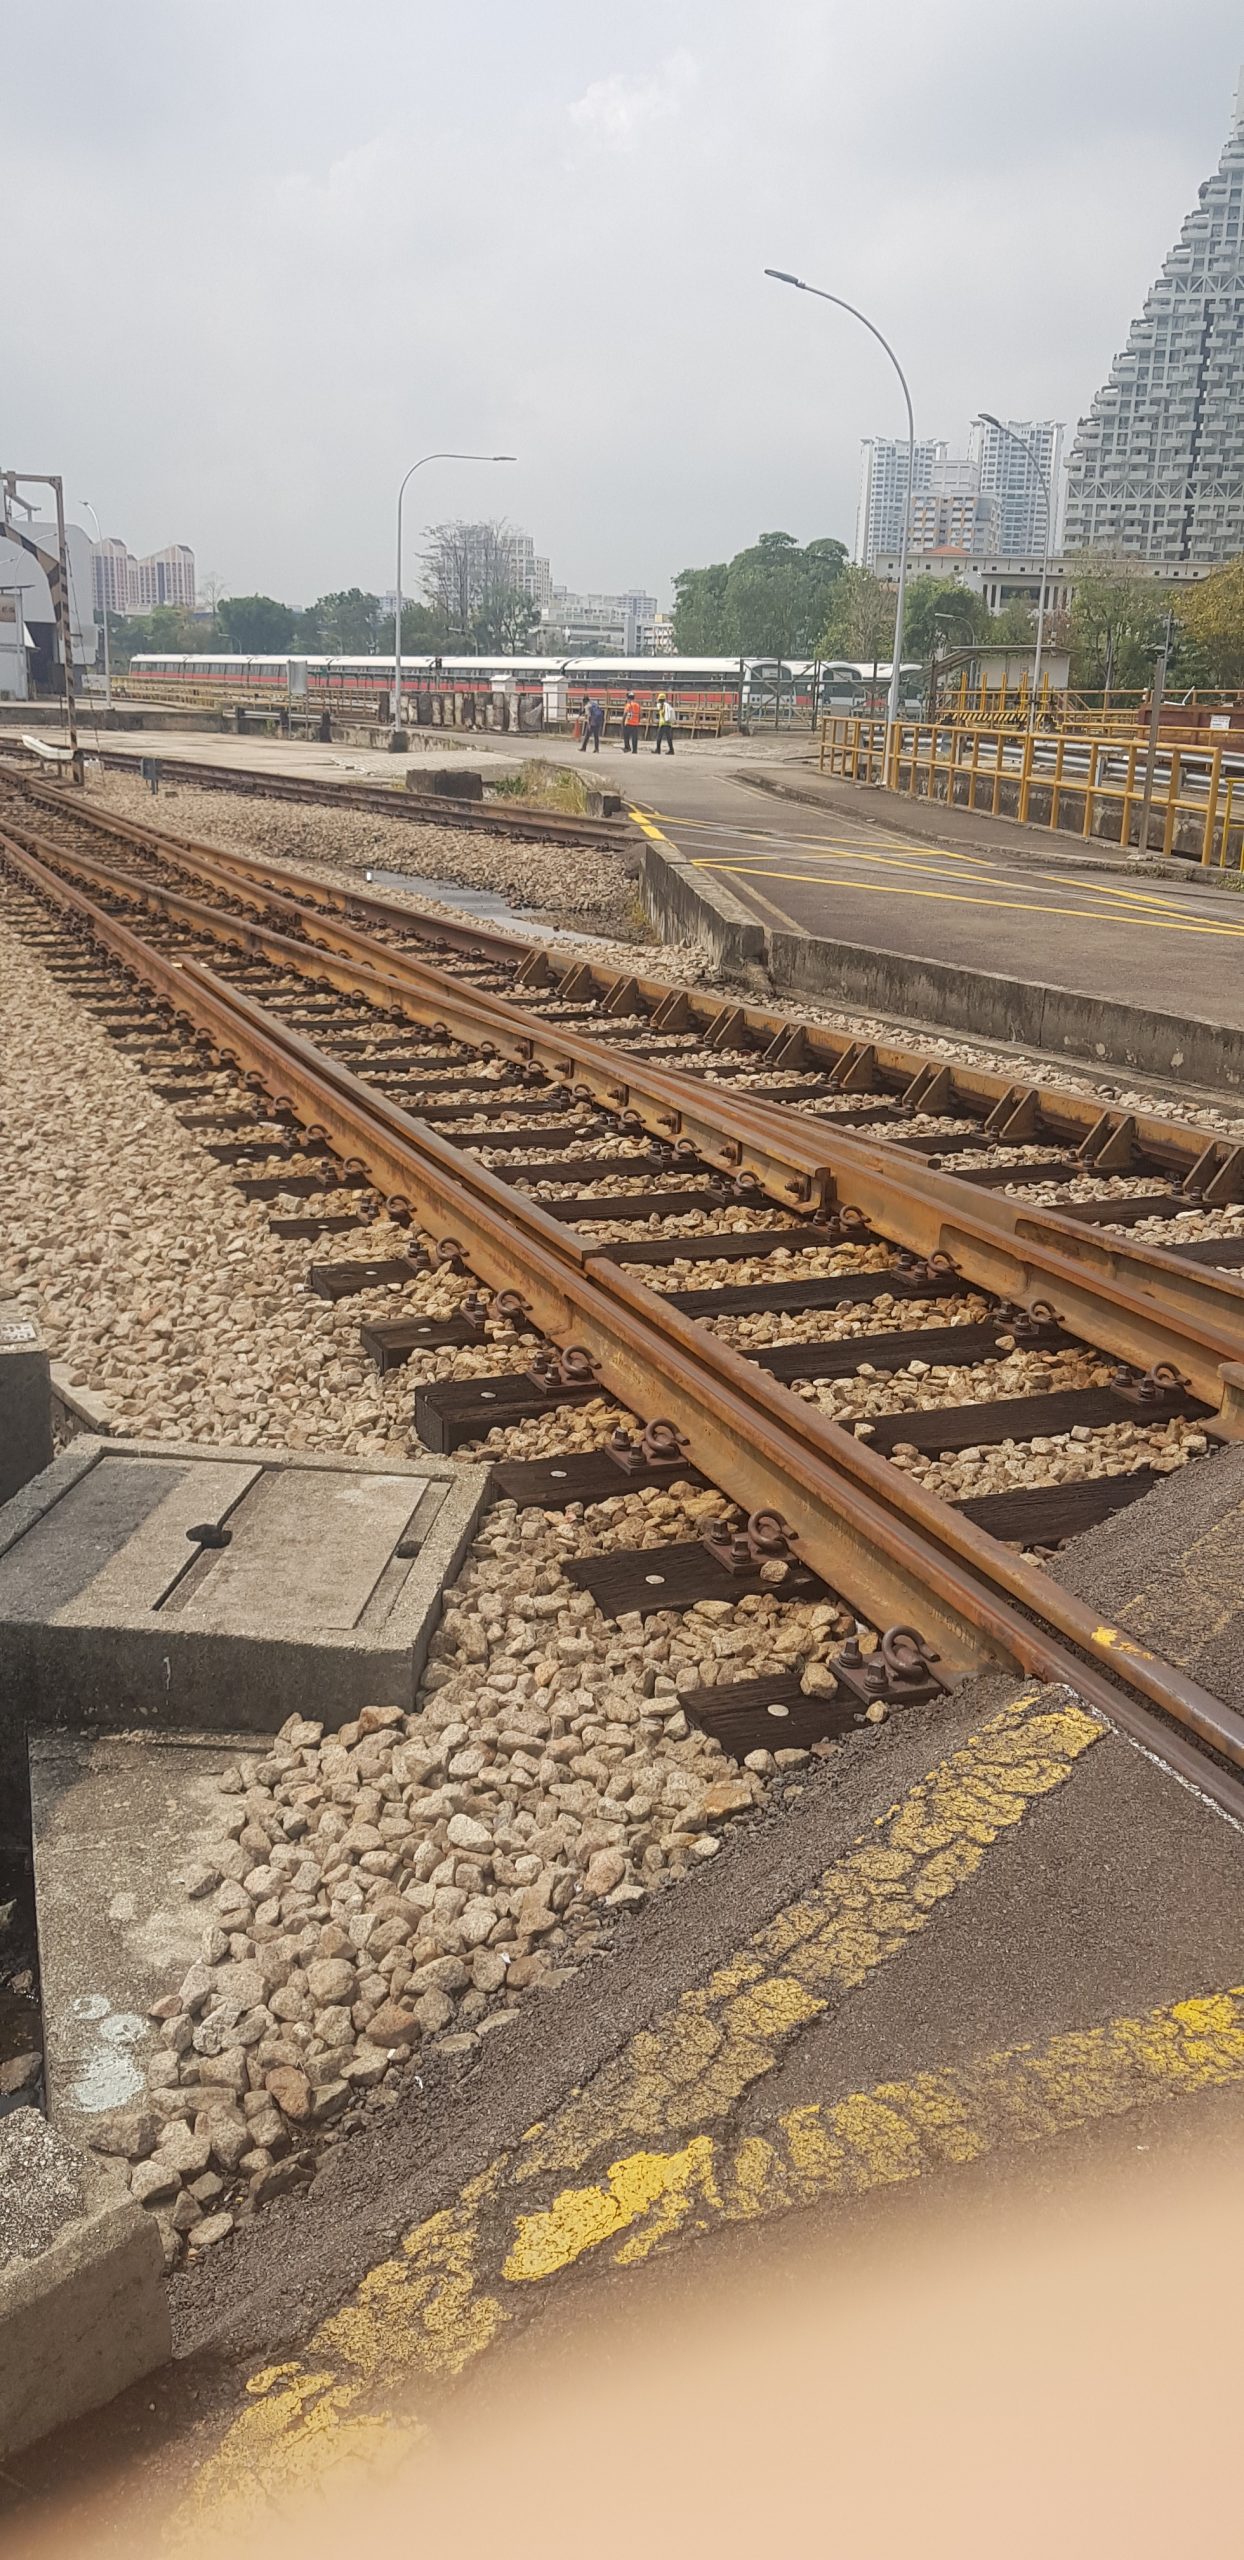 Extension to Existing Lines and Depots